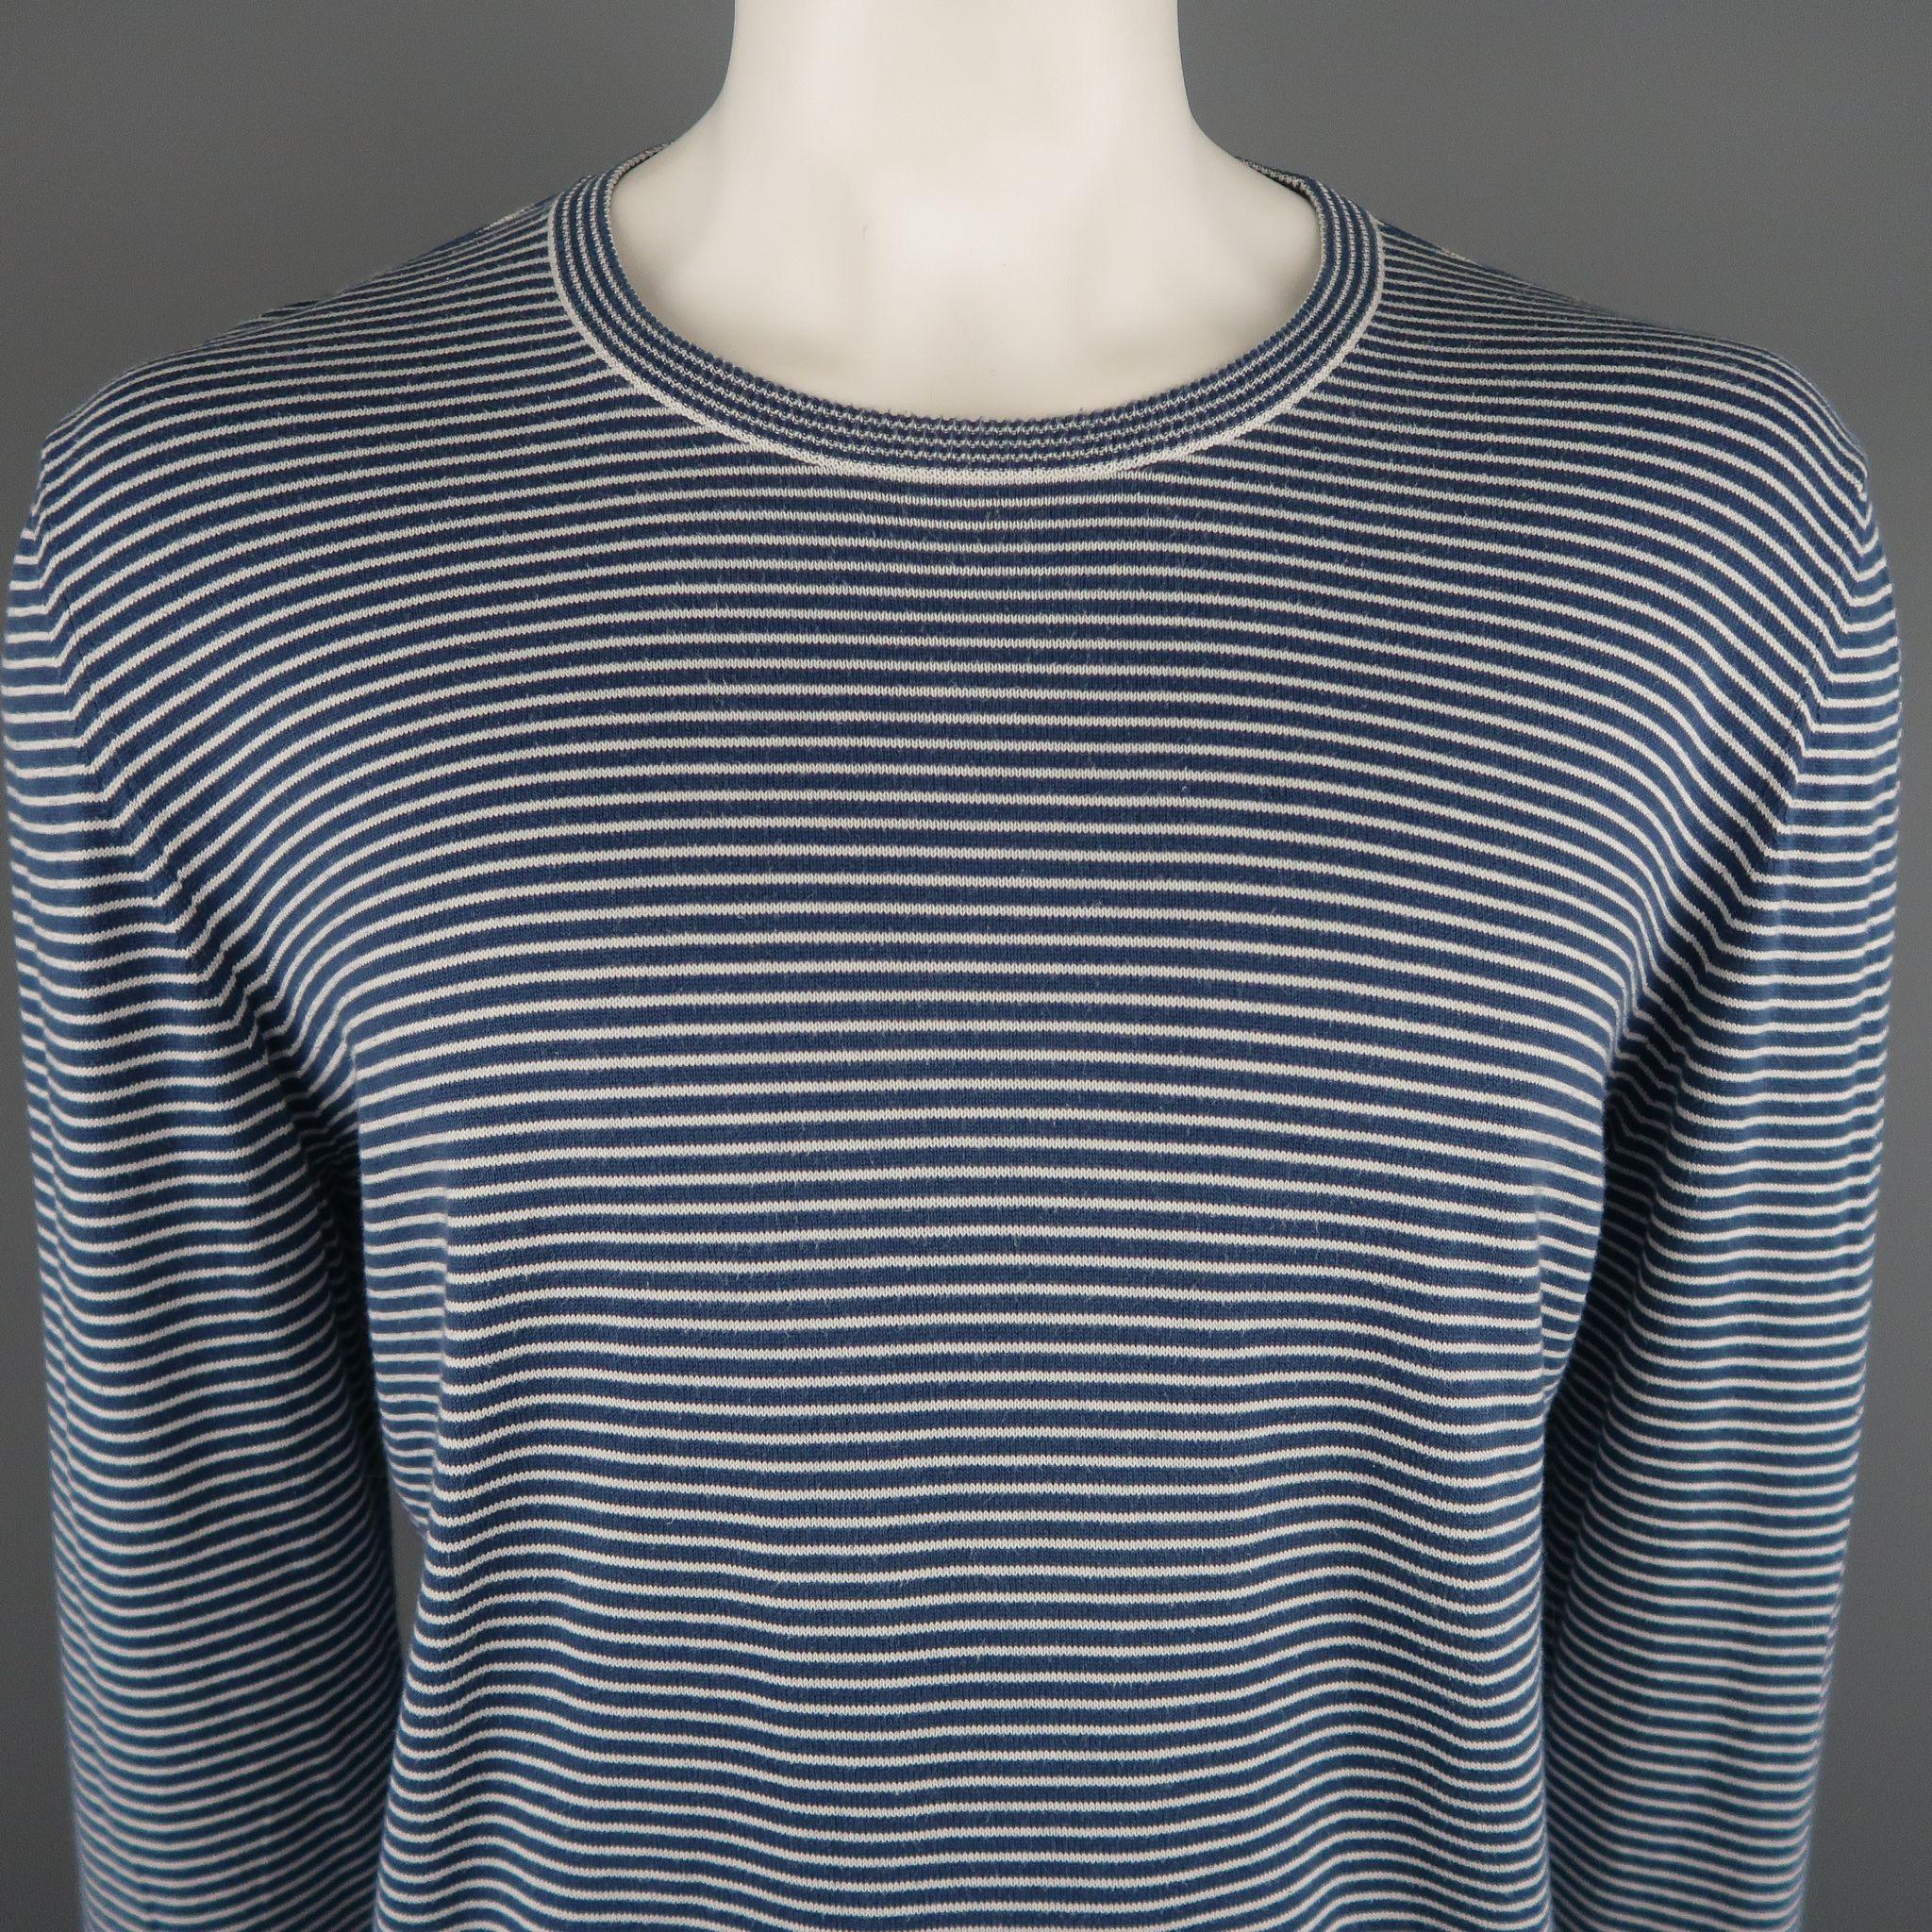 MAISON MARTIN MARGIELA Pullover sweater comes in navy and white tones in a striped cotton material, with a crewneck and ribbed cuffs and hem. Missing Tag. Made in Italy.

Excellent Pre-Owned Condition.
Marked: No size marked, size estimated from